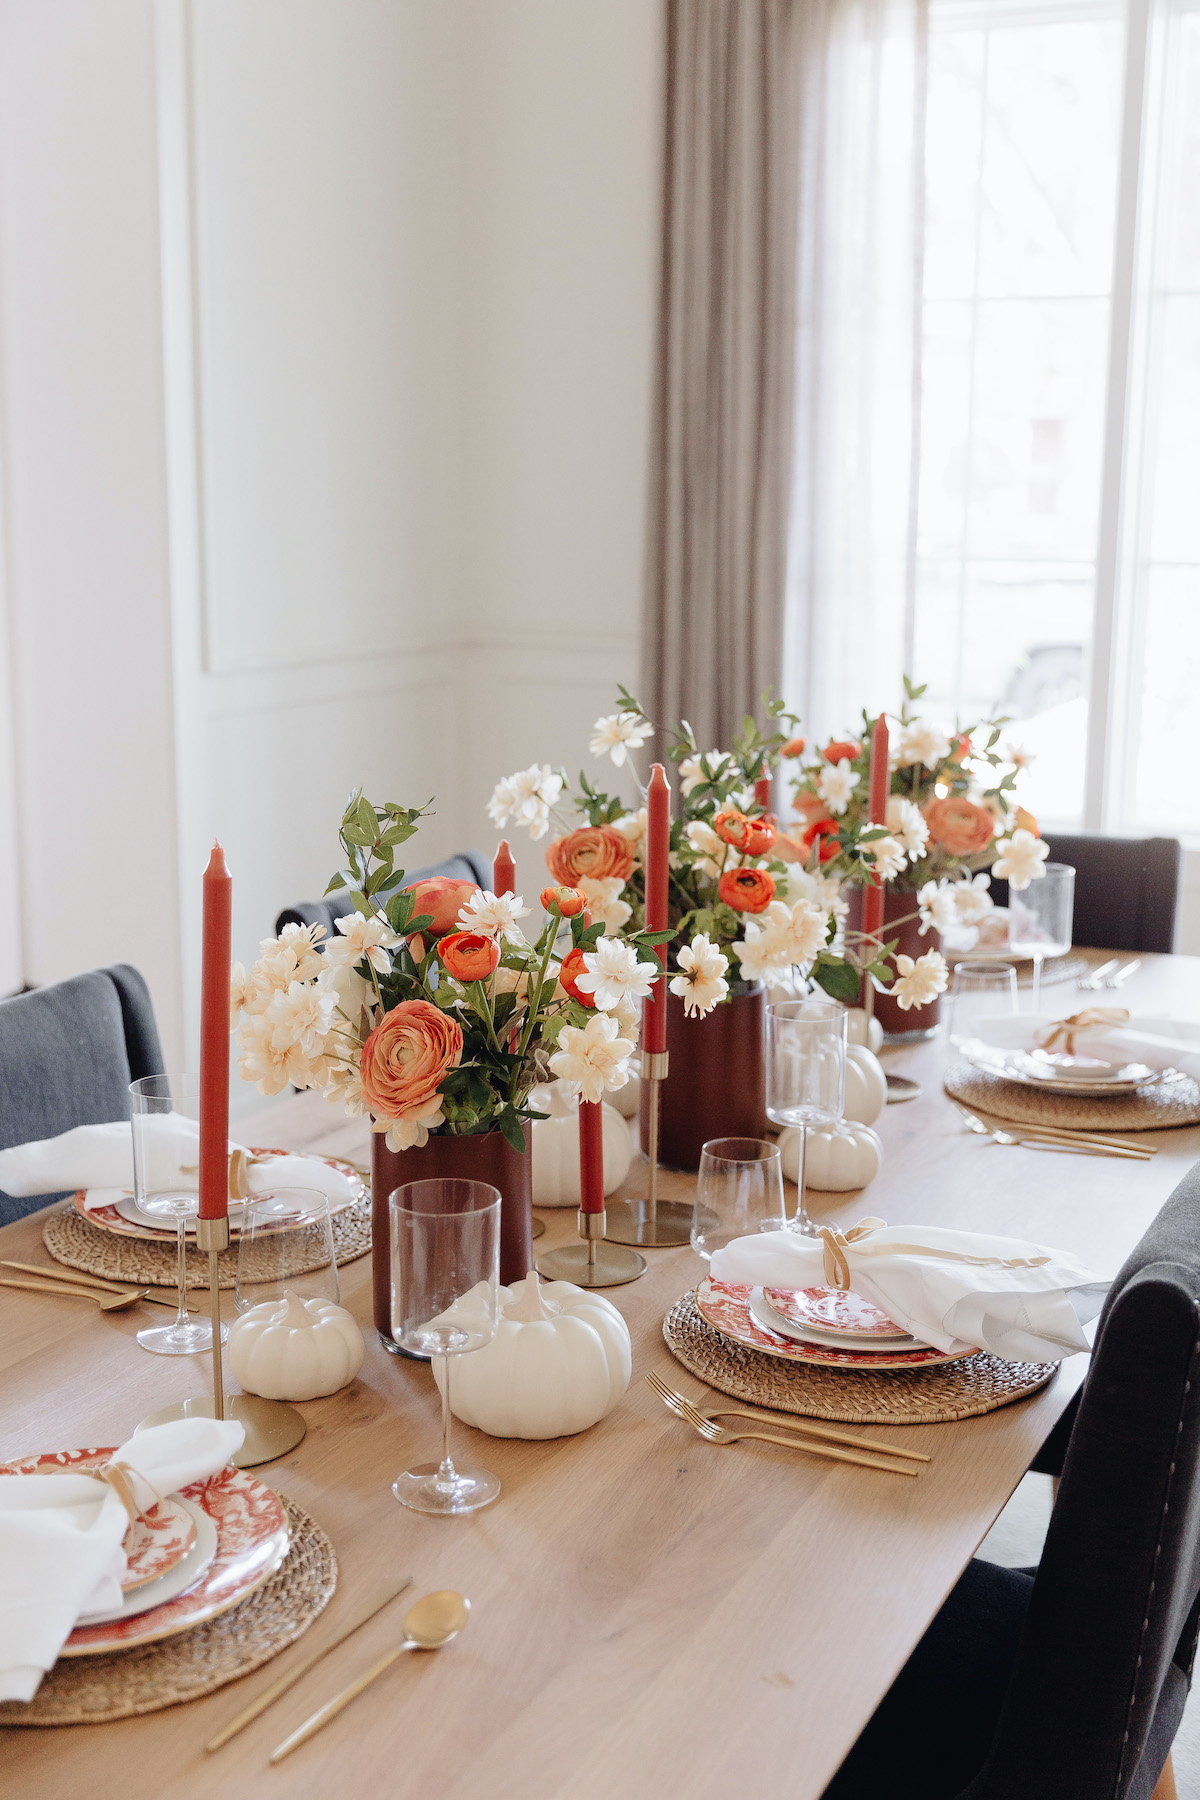 Brighton Butler Fall Tablescape with orange china and candles